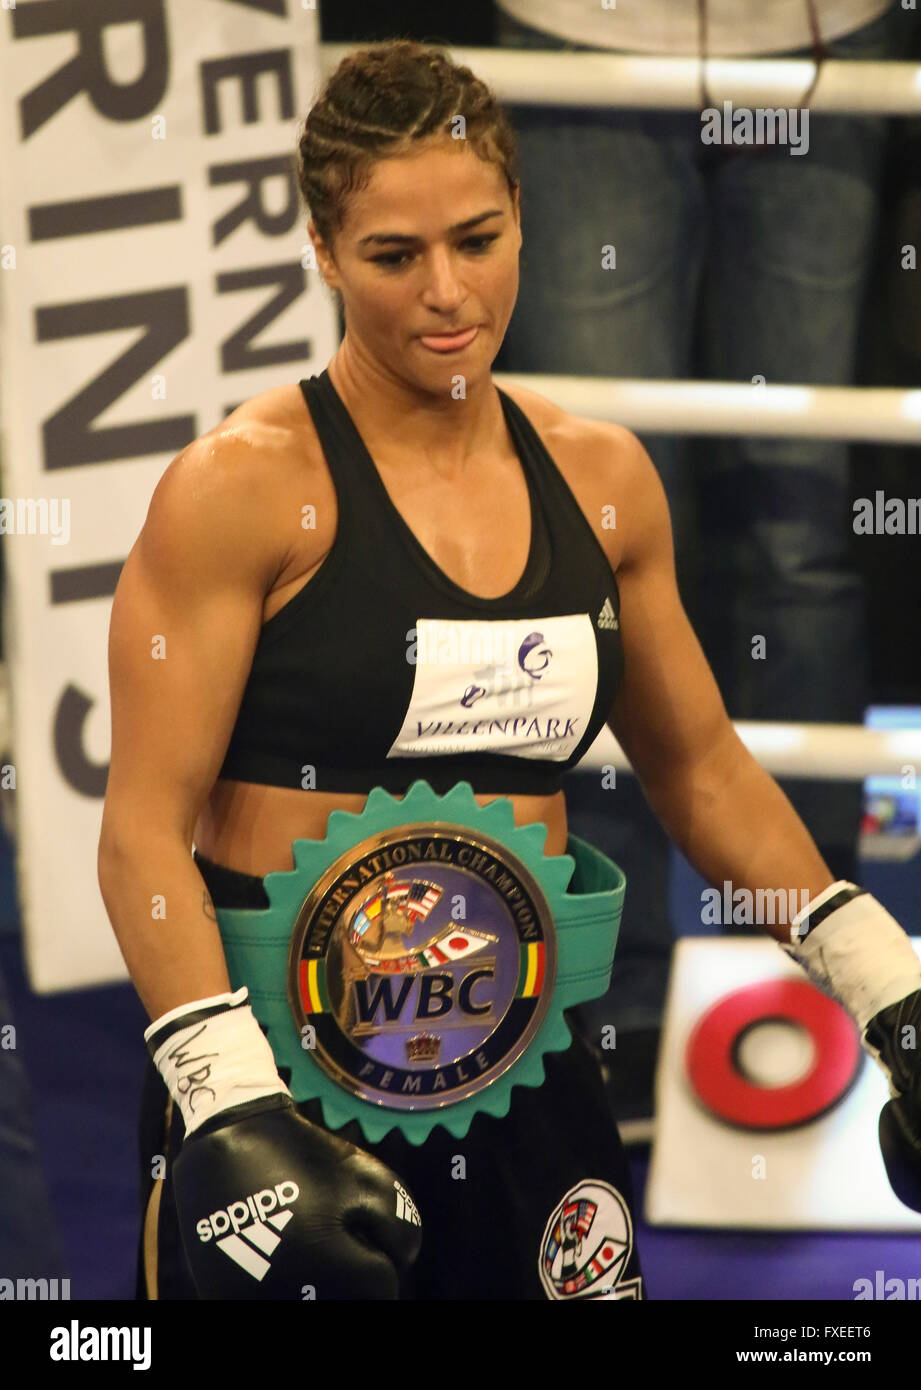 Ladies boxing between Ikram Kerwat (Germany) and Gina Chamie (Hungary) for the vacant WBC lightweight title, Potsdam, Germany, April 2016 Stock Photo